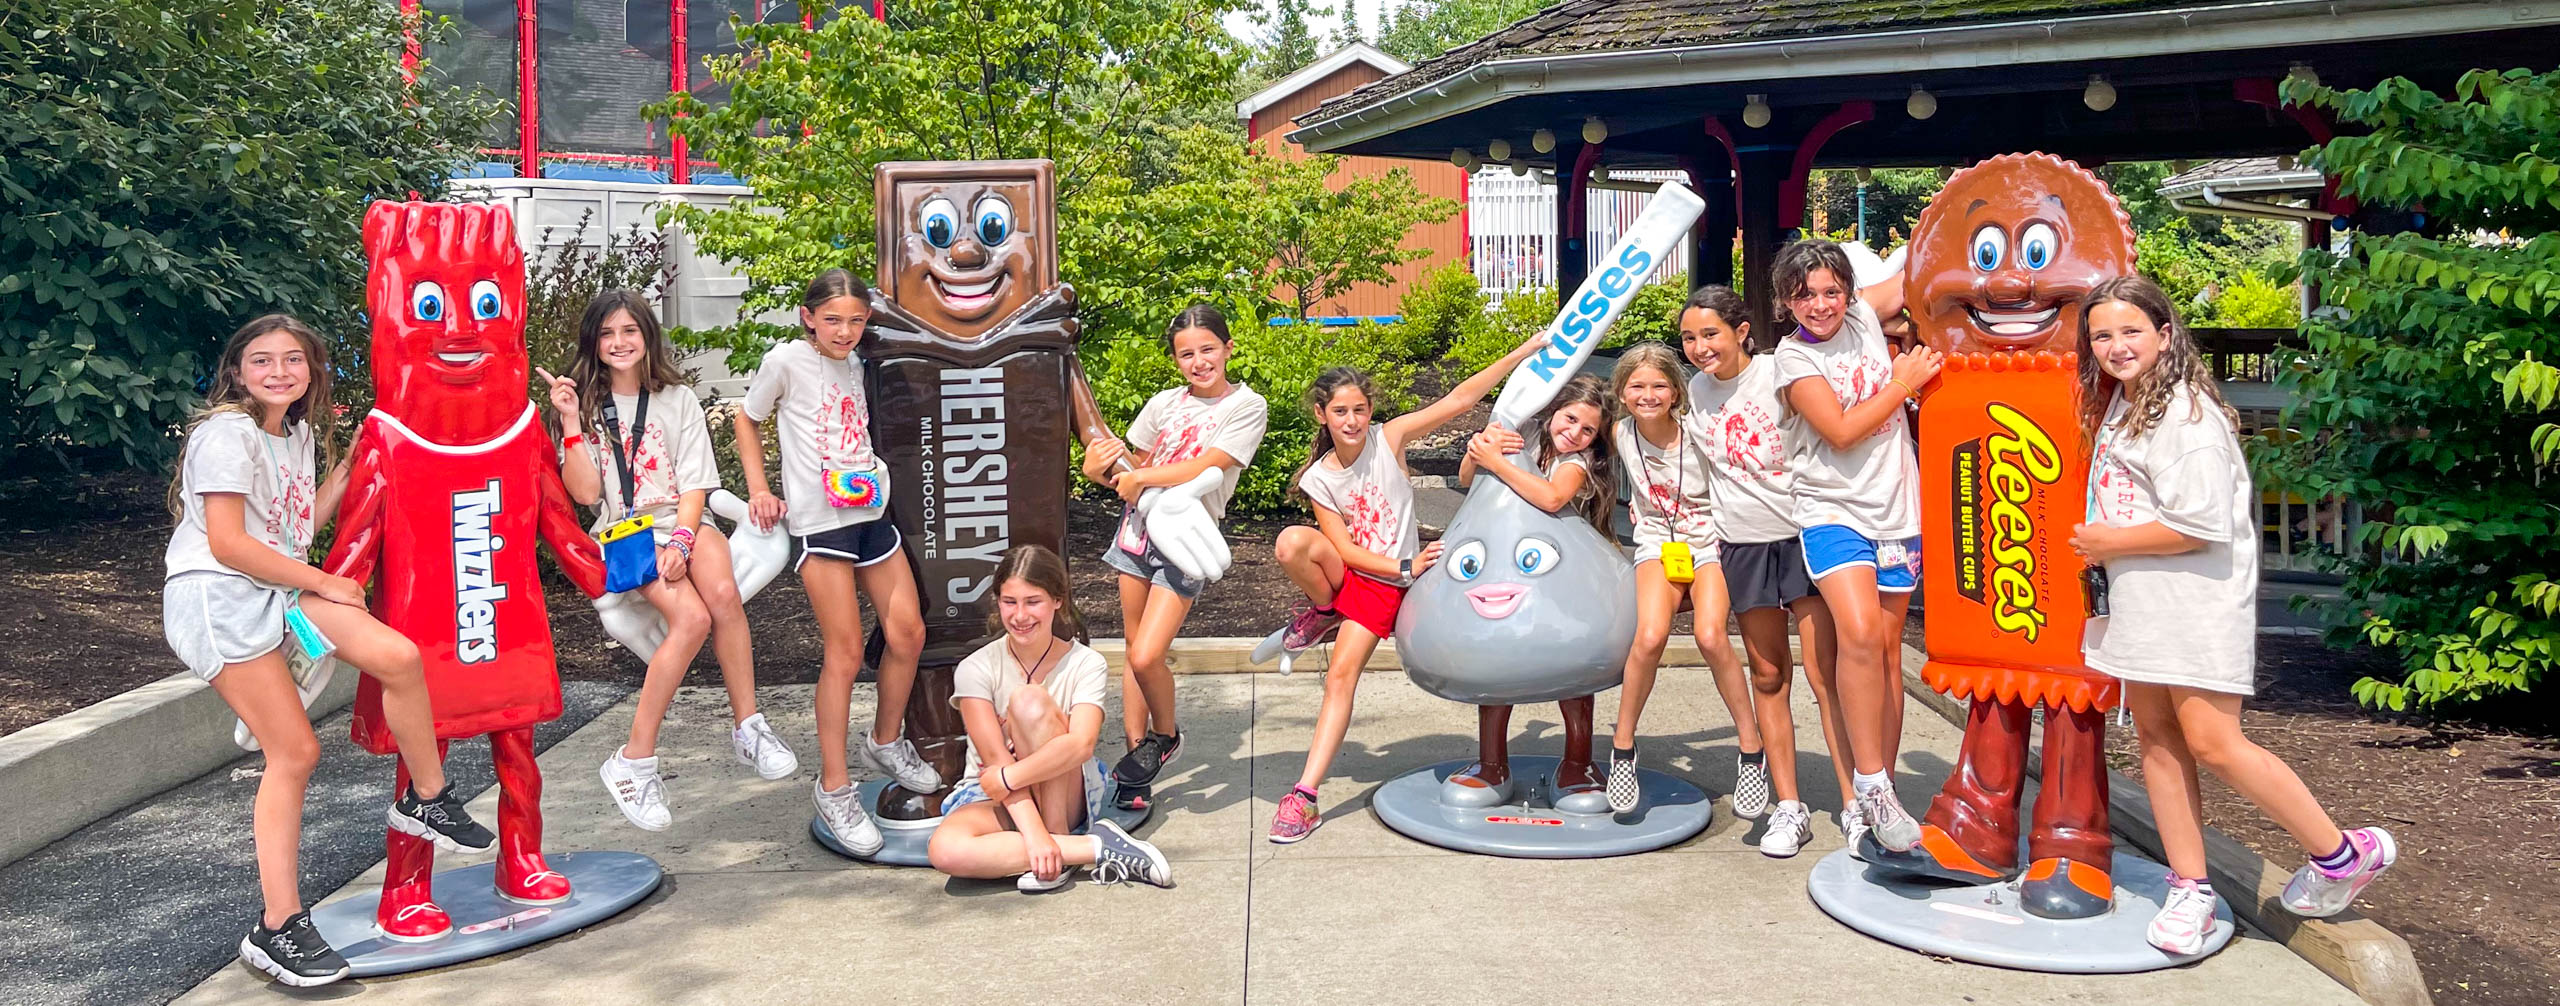 Campers on a trip to Hershey factory.